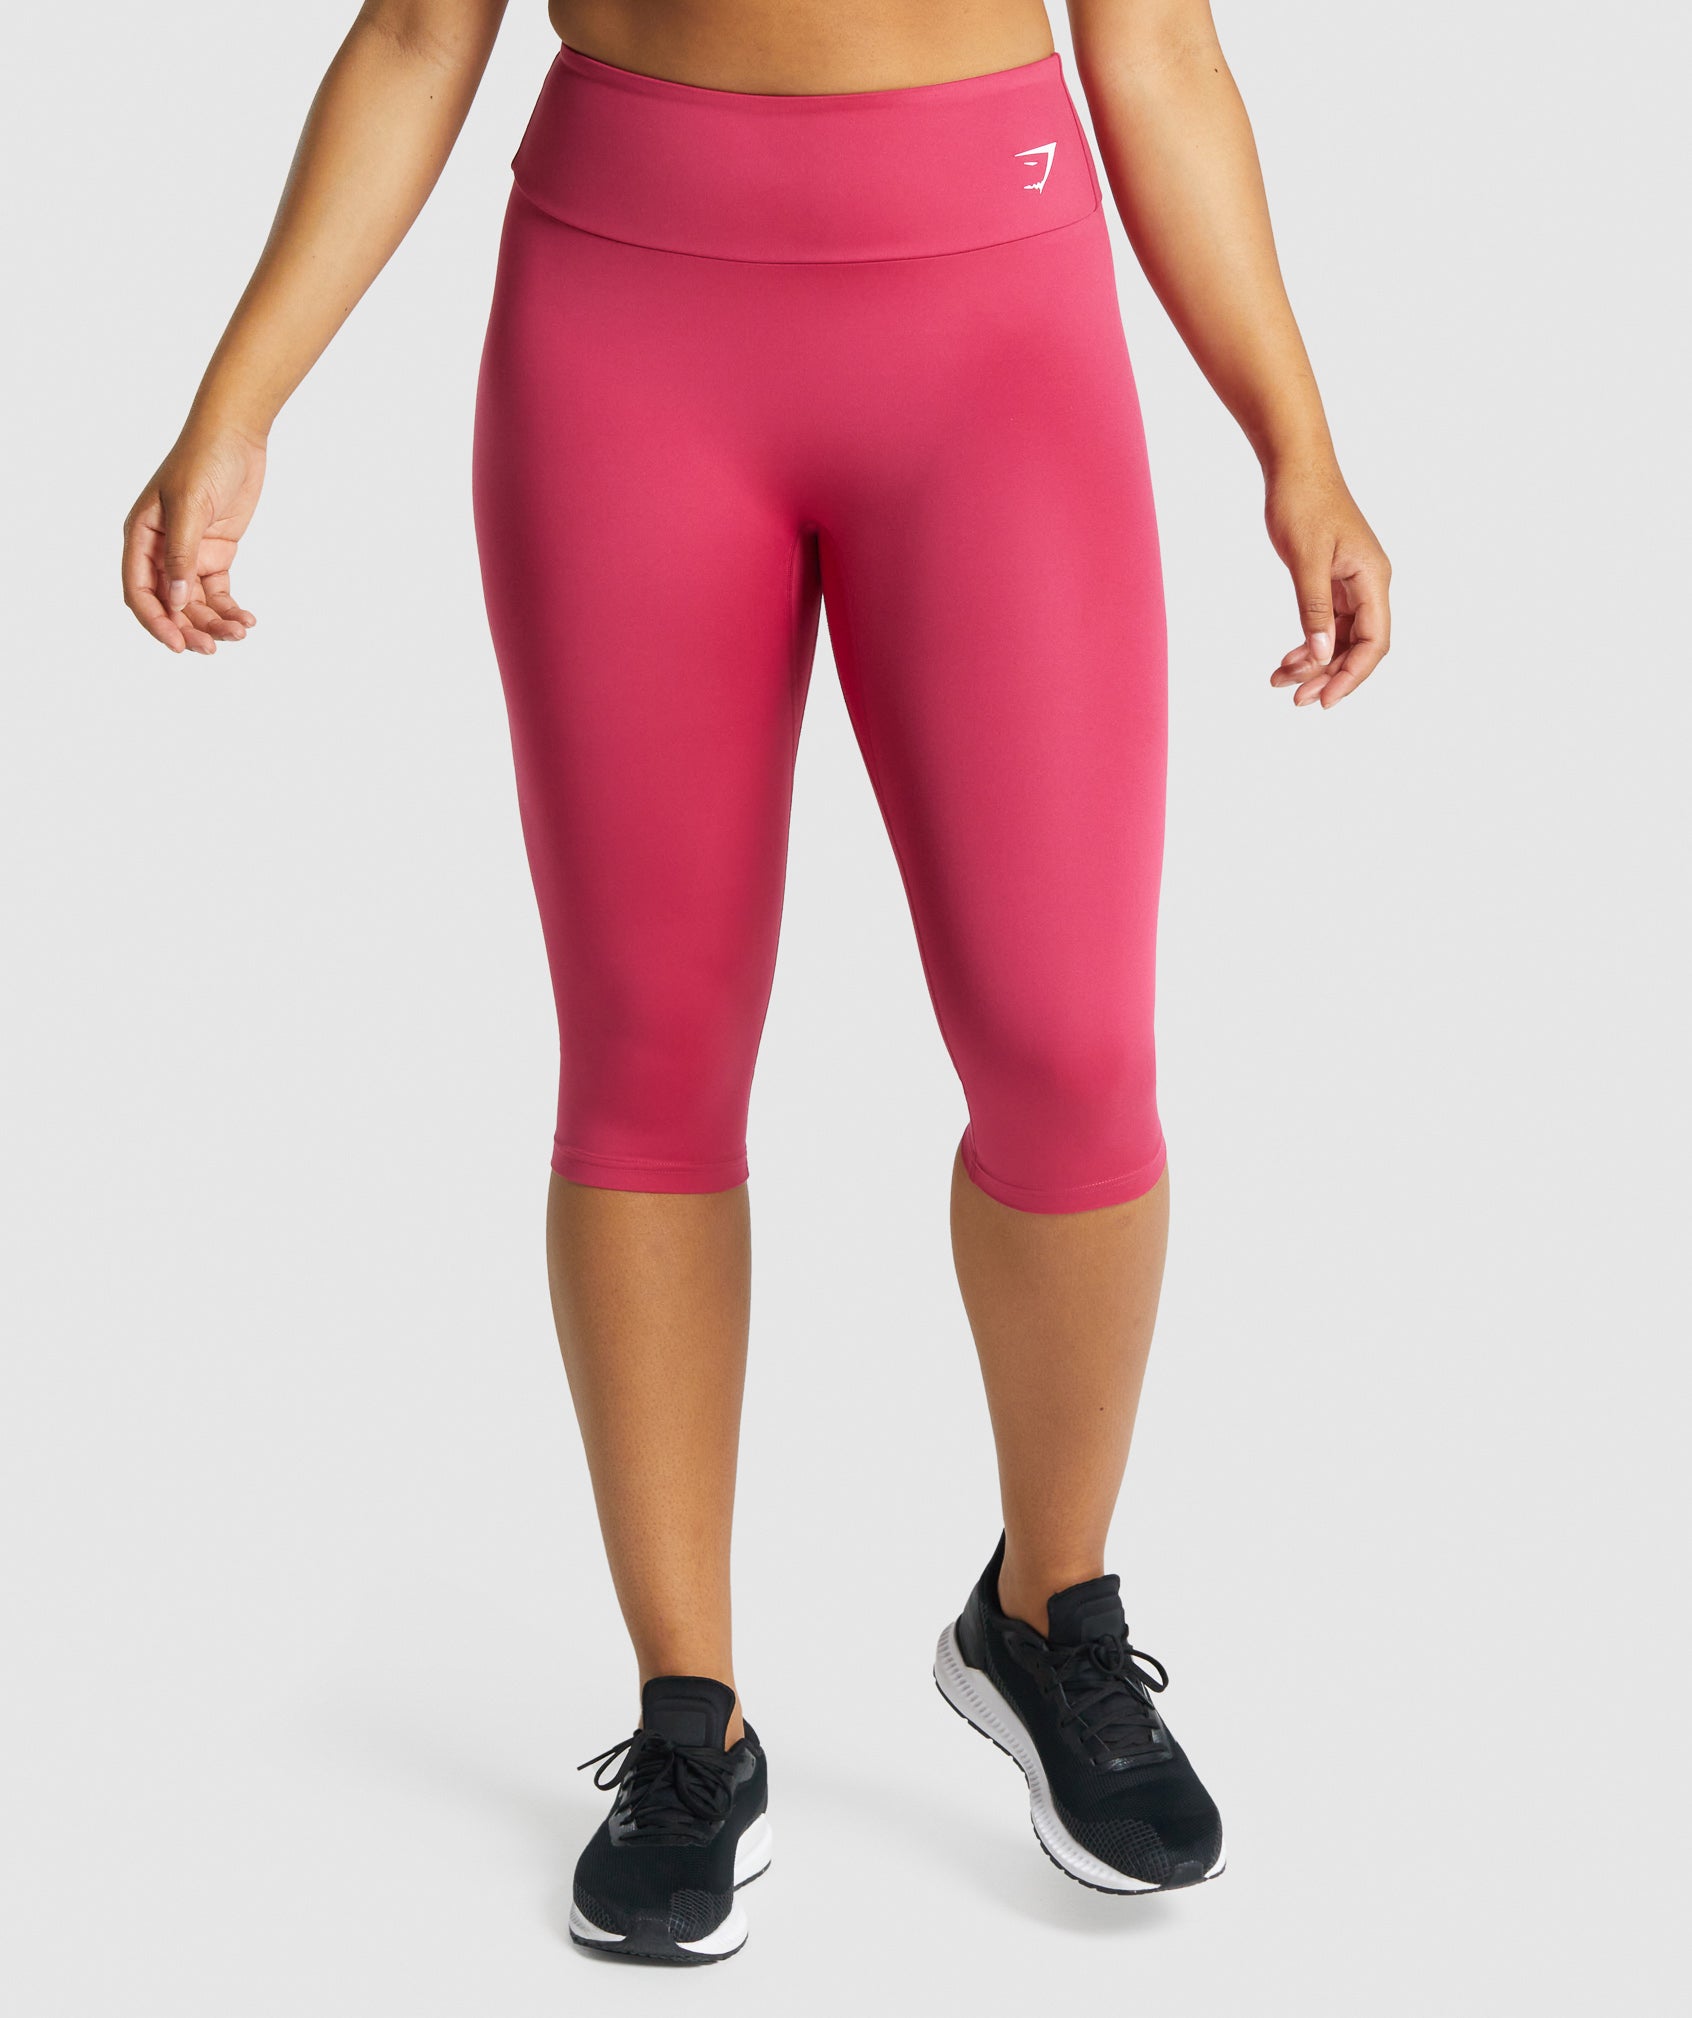 Fabletics Ultra Cool Pink Cropped Leggings Size Small